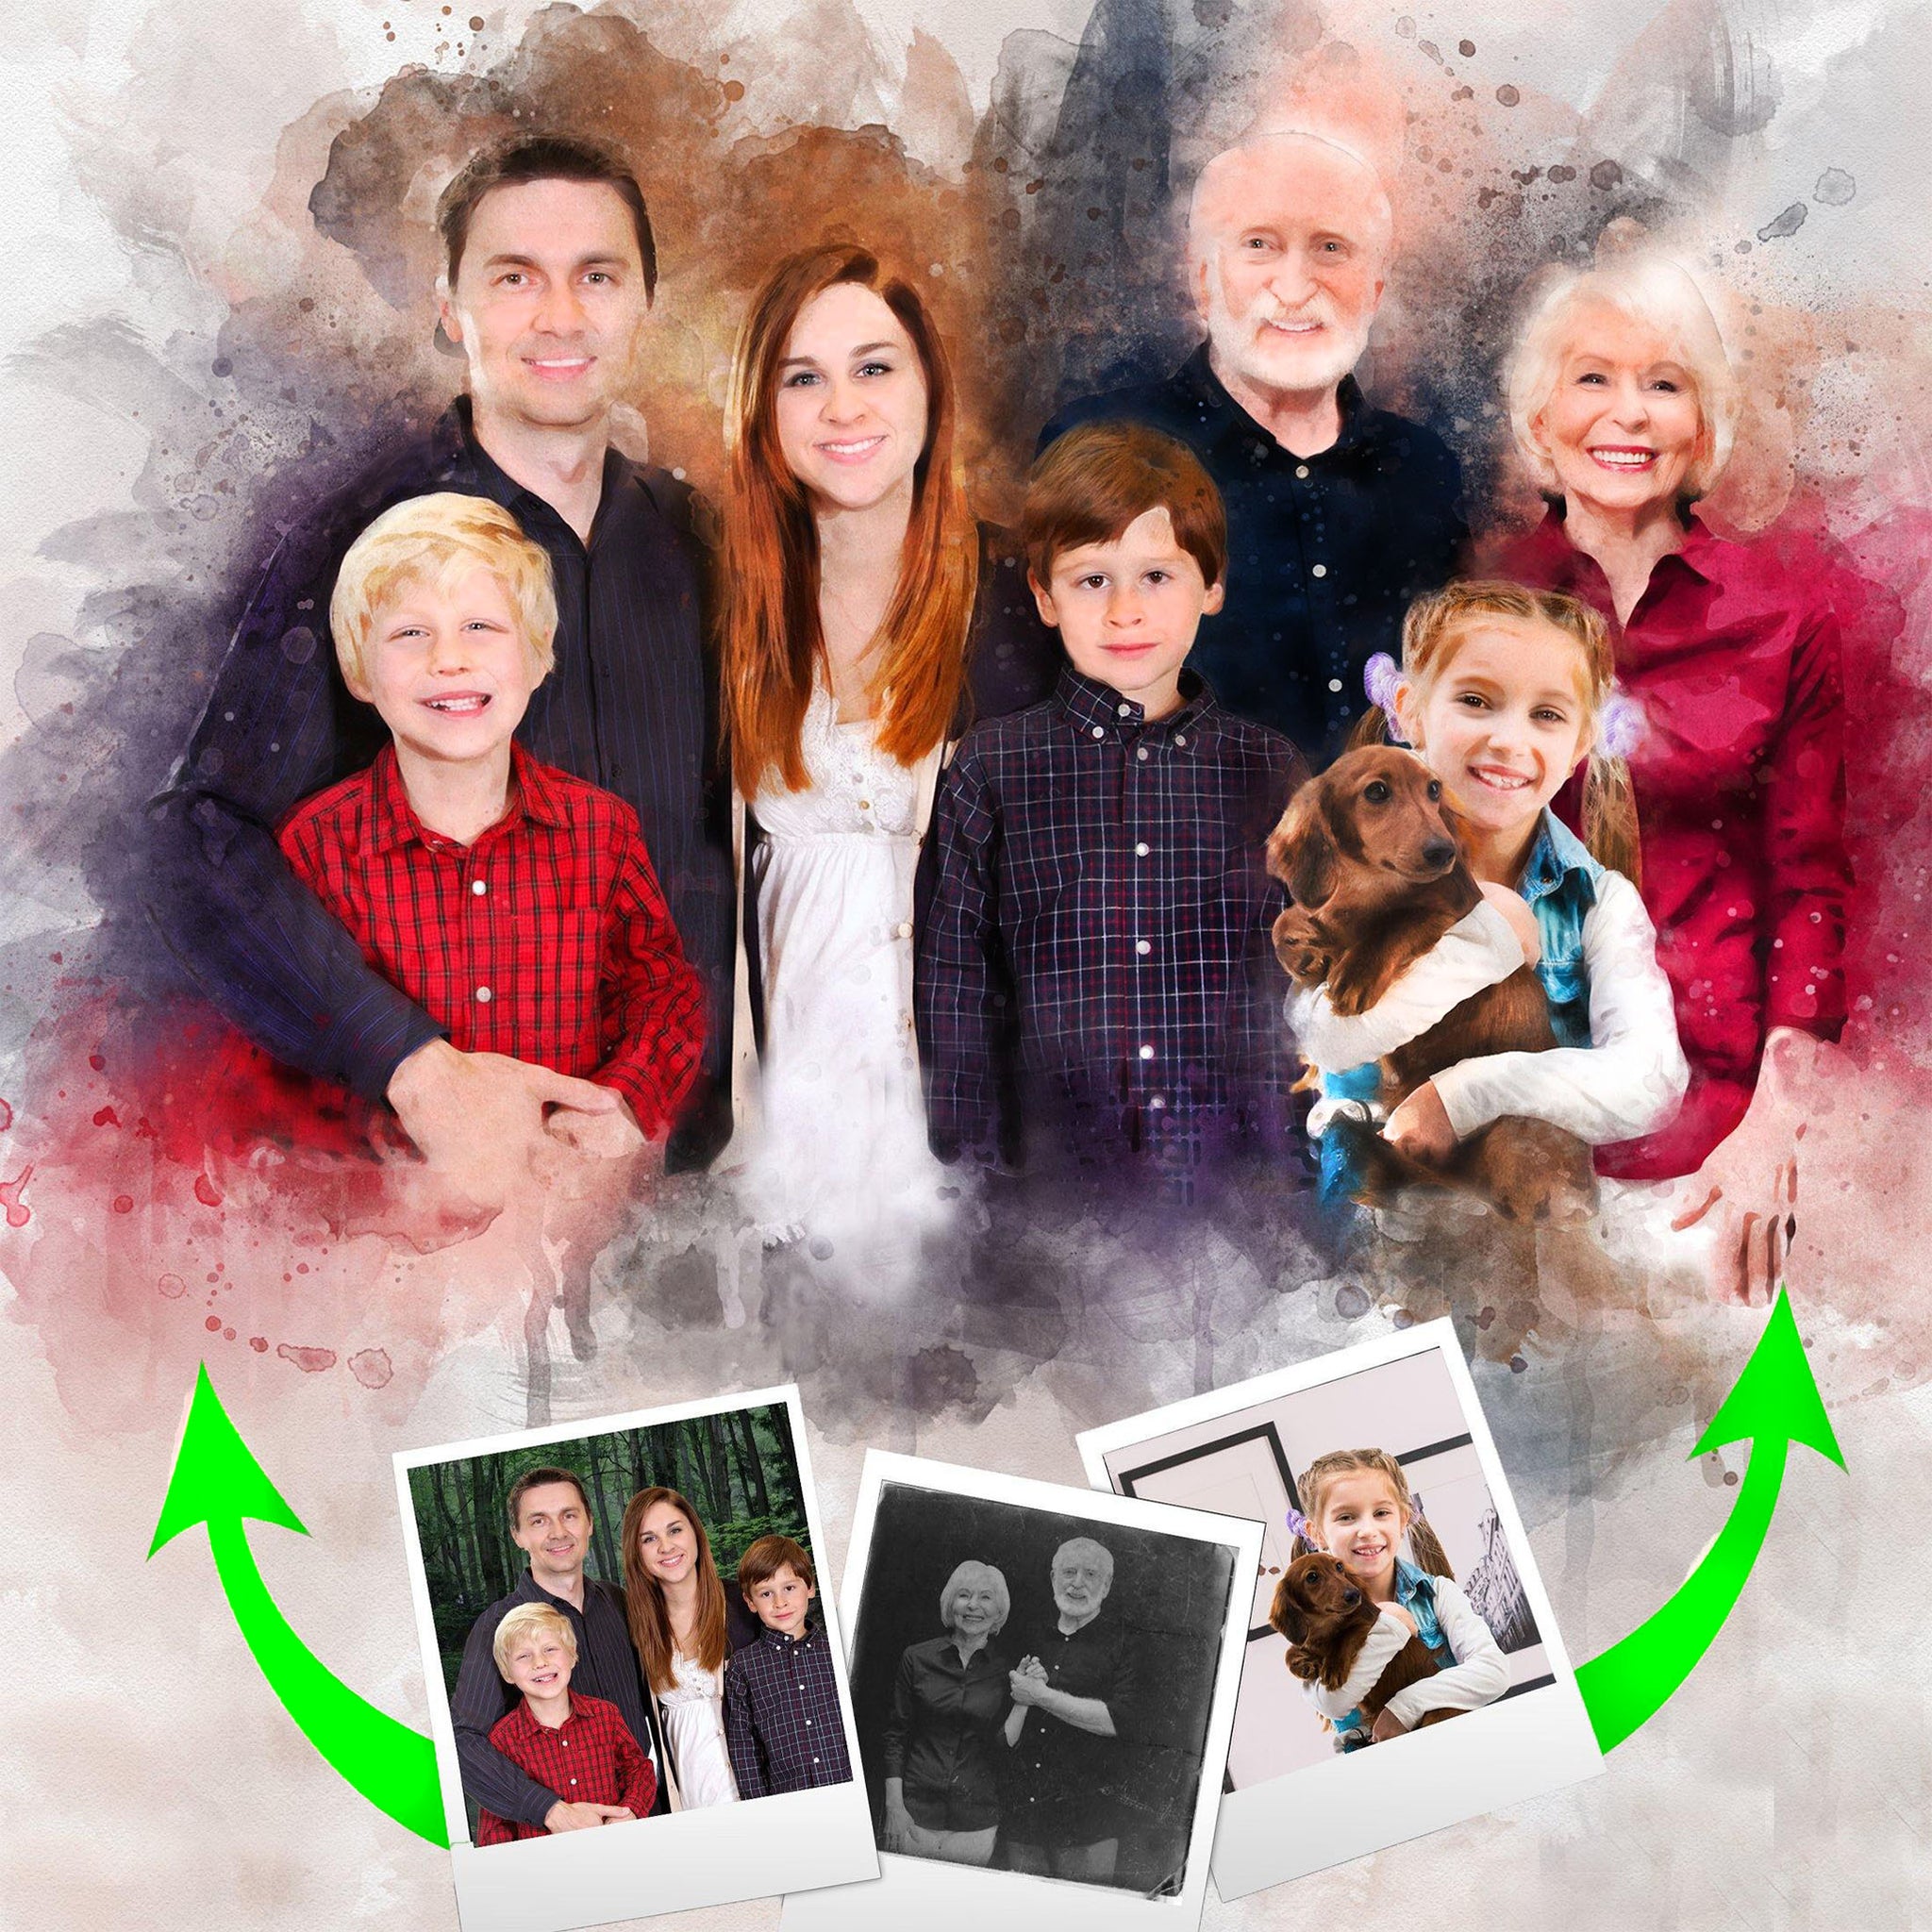 🌈 Incorporating a Lost Loved One in Family Pictures | Custom Painting From Photo | Add People to Photo | Add Someone into a Picture | Add Deceased Loved One | Custom Family Portrait | Merge Photos Into Painting | Combine Photos | Personalized Gifts - FromPicToArt